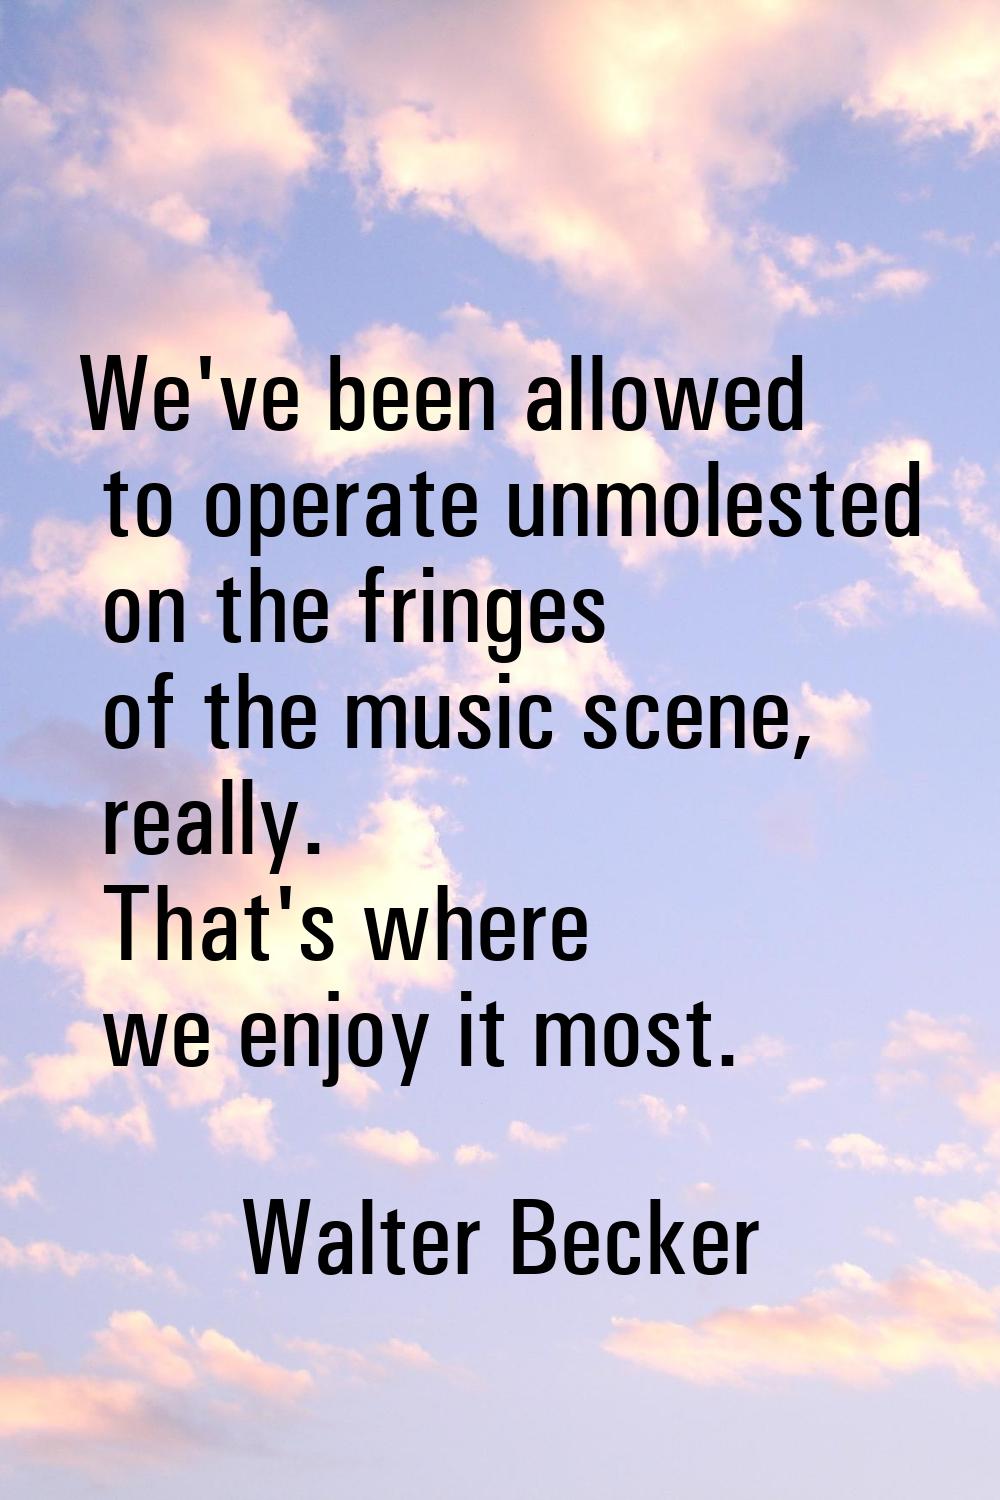 We've been allowed to operate unmolested on the fringes of the music scene, really. That's where we